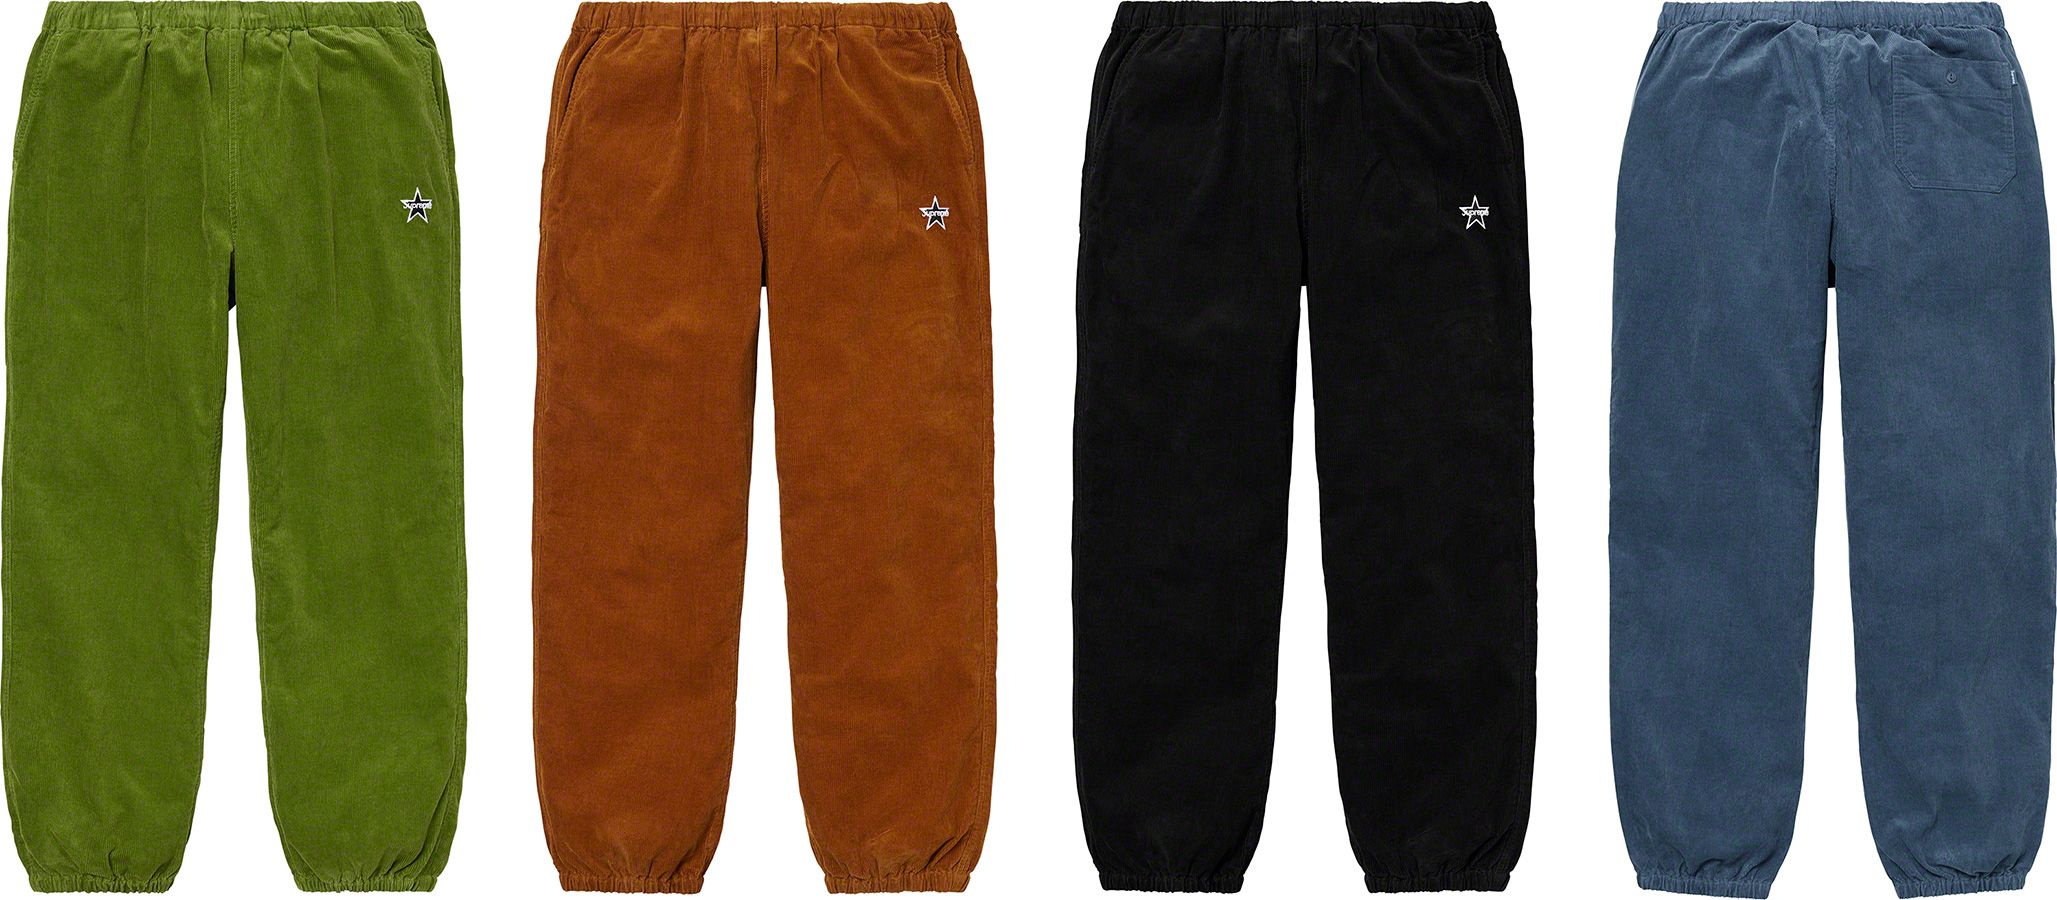 Supreme Is Love Skate Pant - Fall/Winter 2019 Preview – Supreme